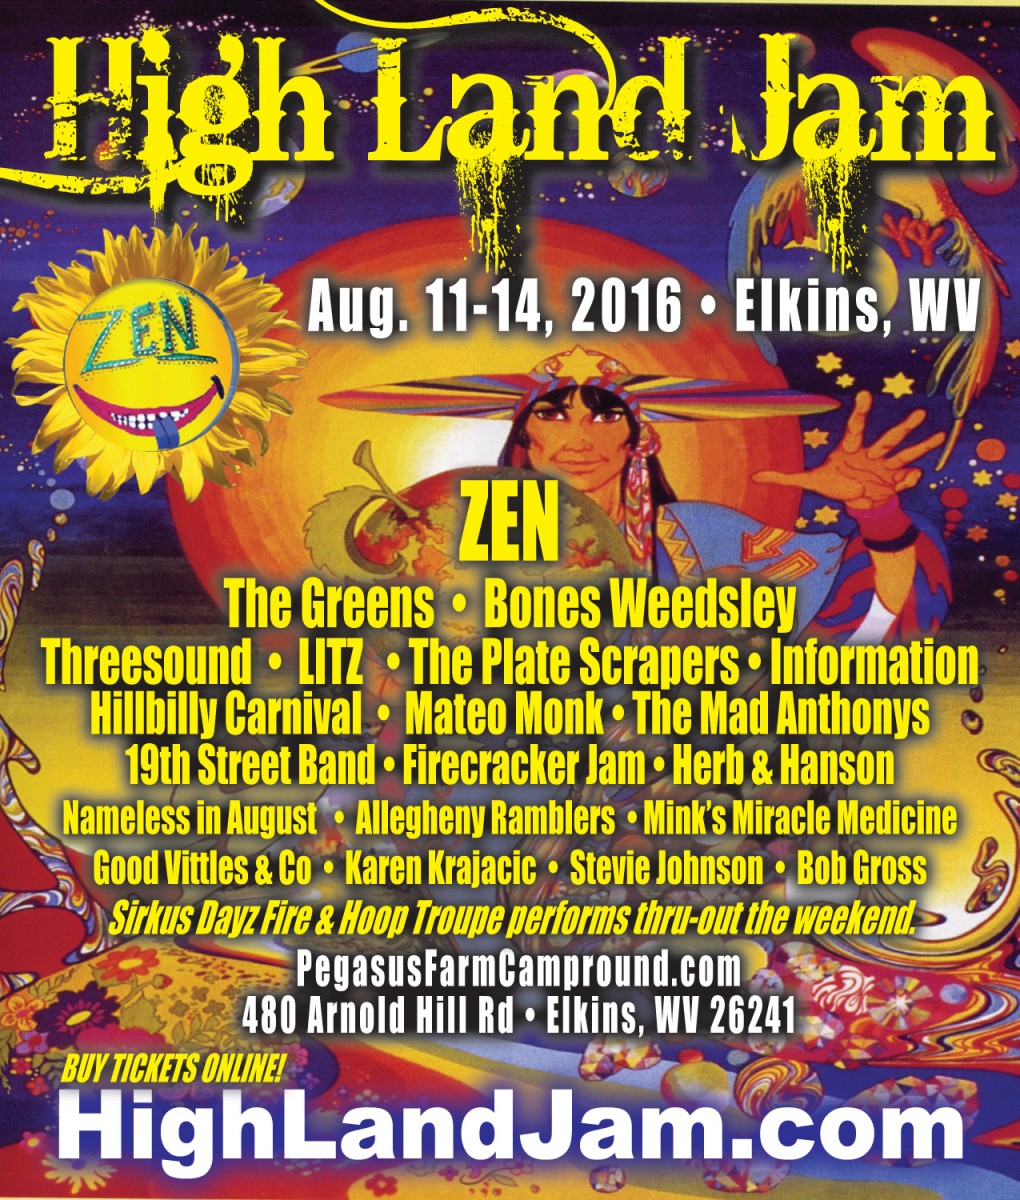 High Land Jam Preview THIS WEEKEND Aug 11-14, Elkins, WV